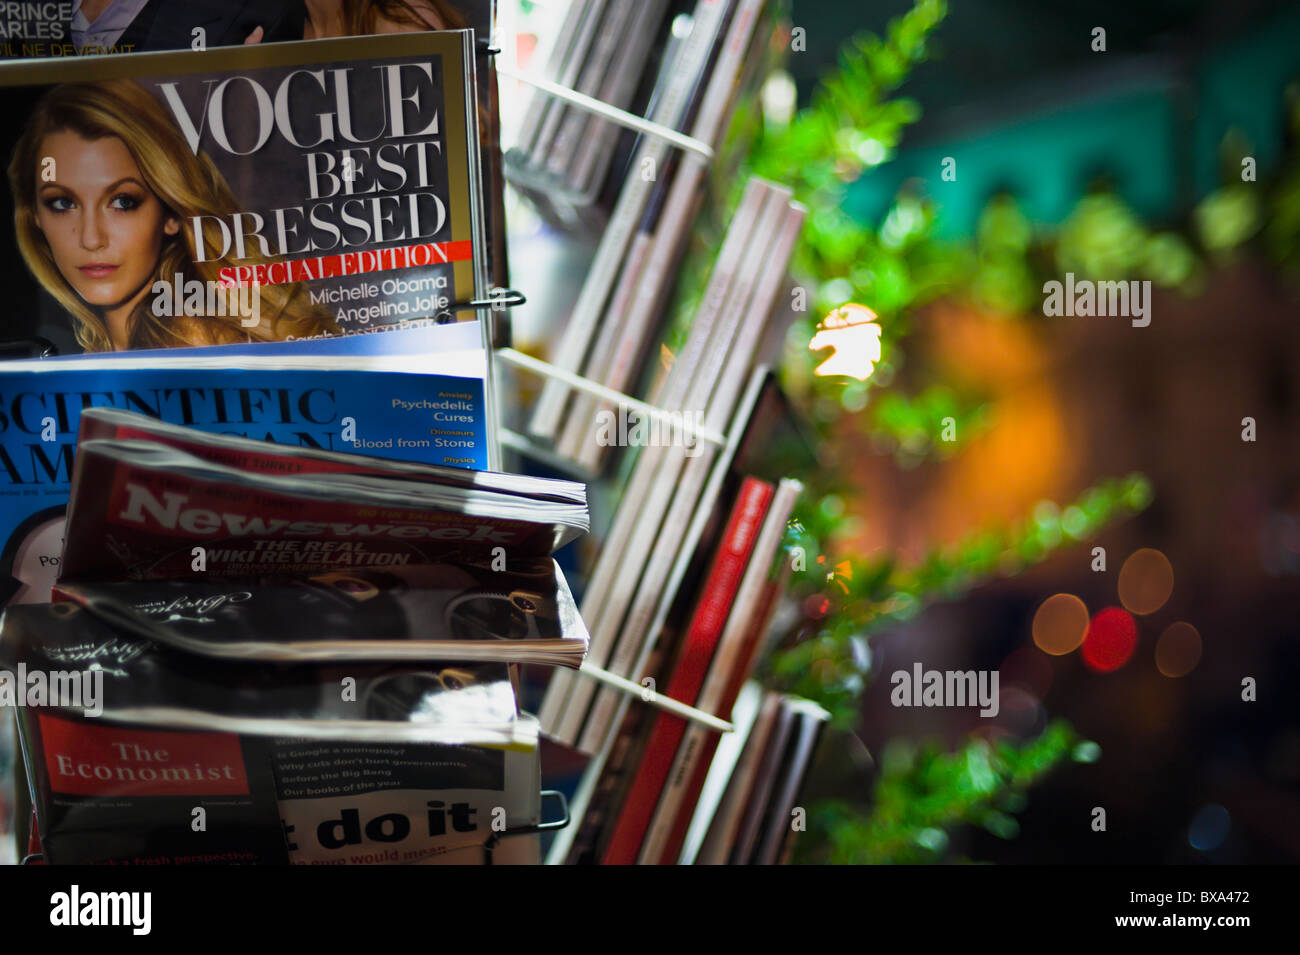 Vogue, Scientific American, Newsweek, The Economist, magazines for sale at a newsstand, by night, shallow DOF Stock Photo